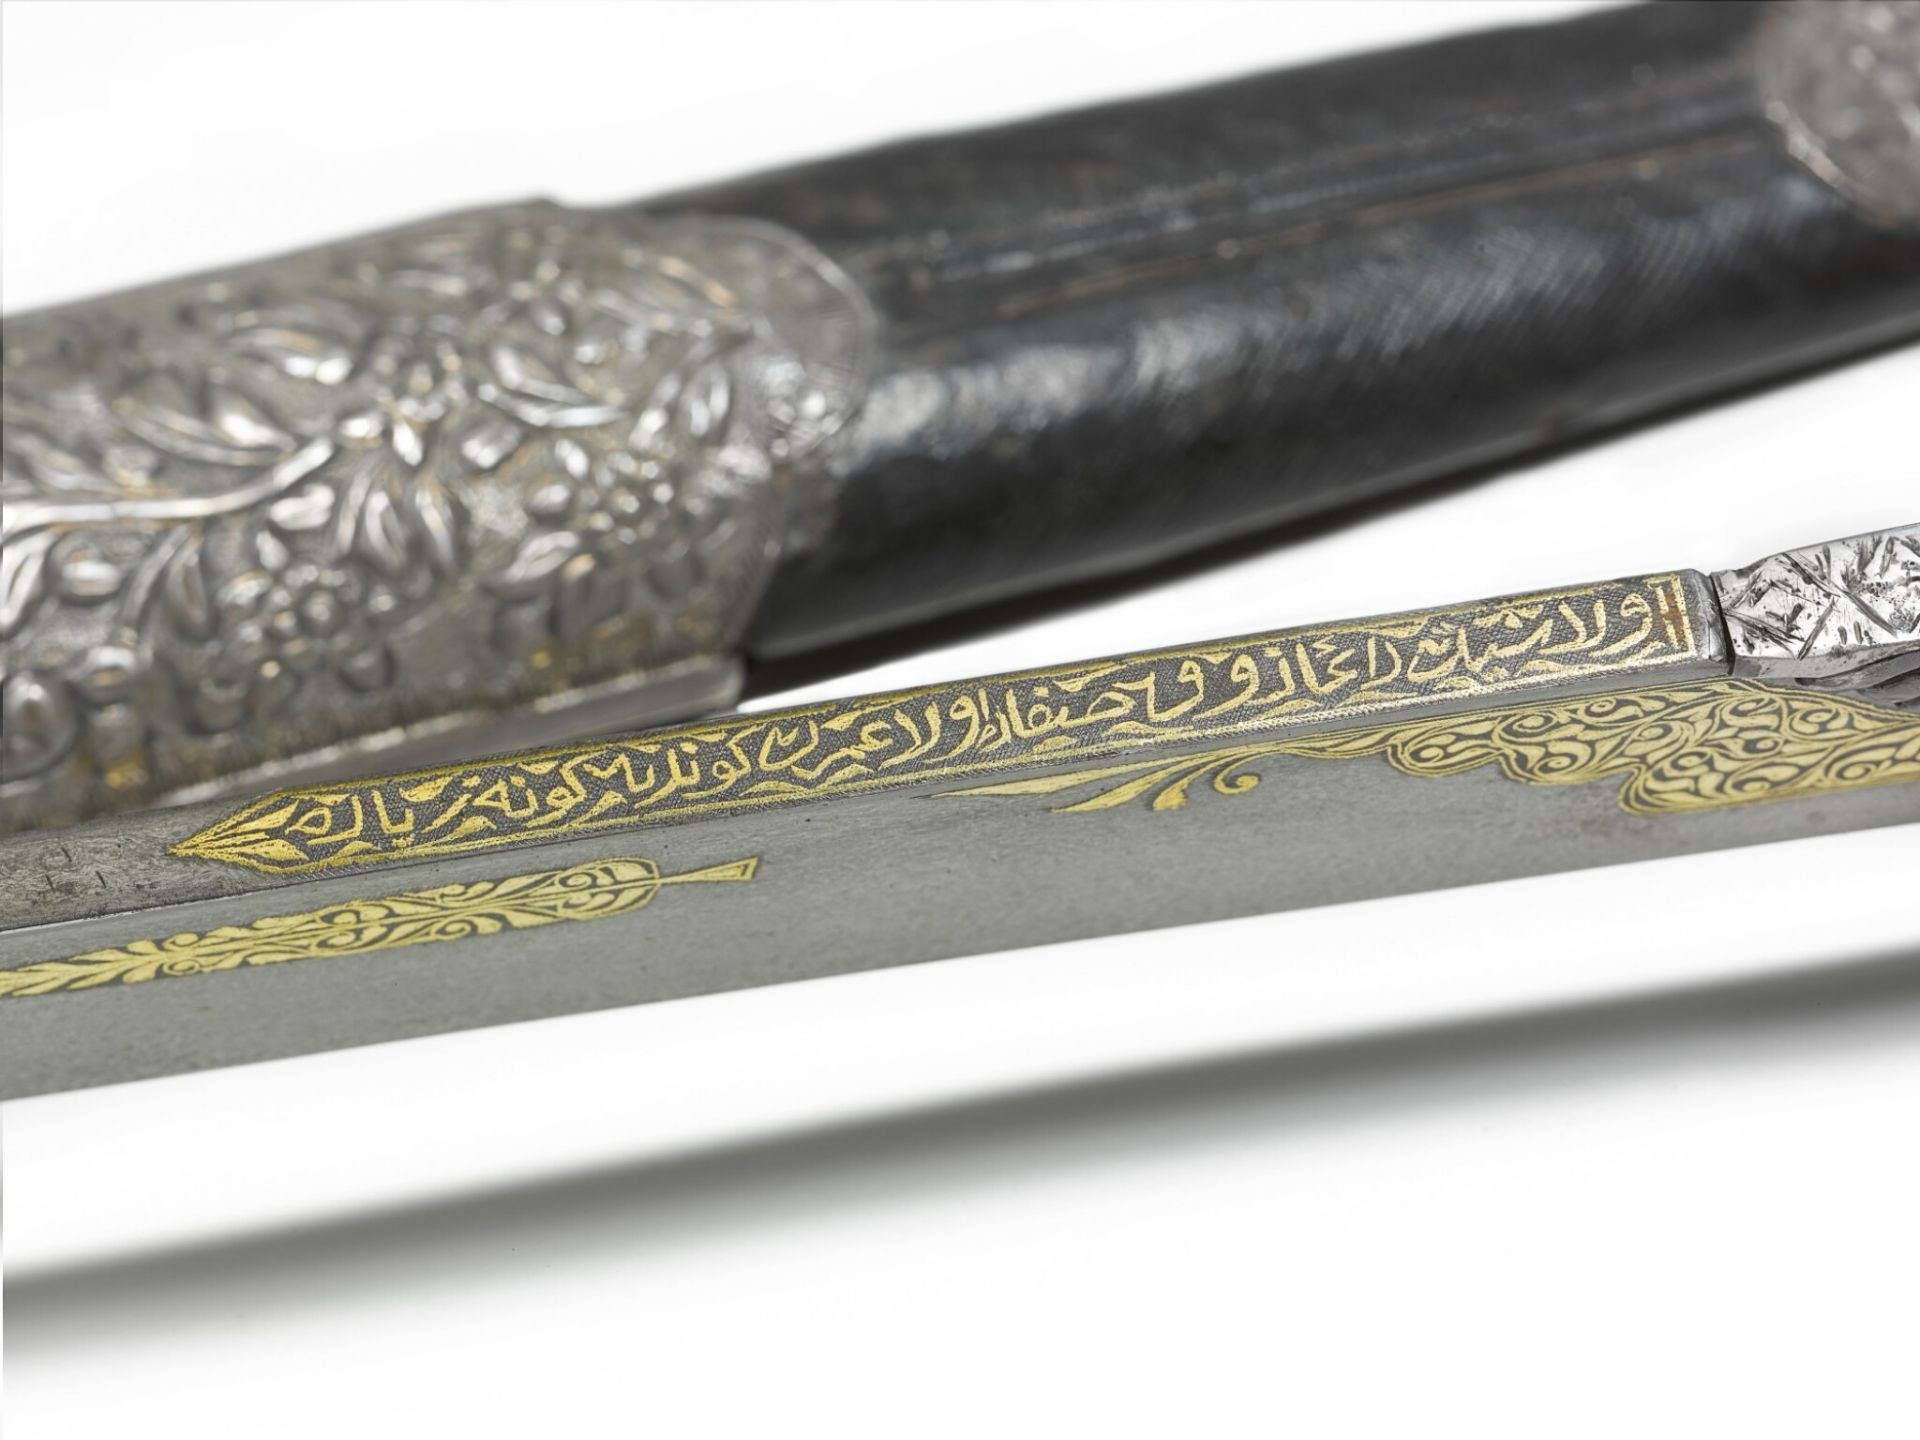 Ottoman agate-hilted dagger with scabbard, Turkey, late 18th/19th century - Image 2 of 4